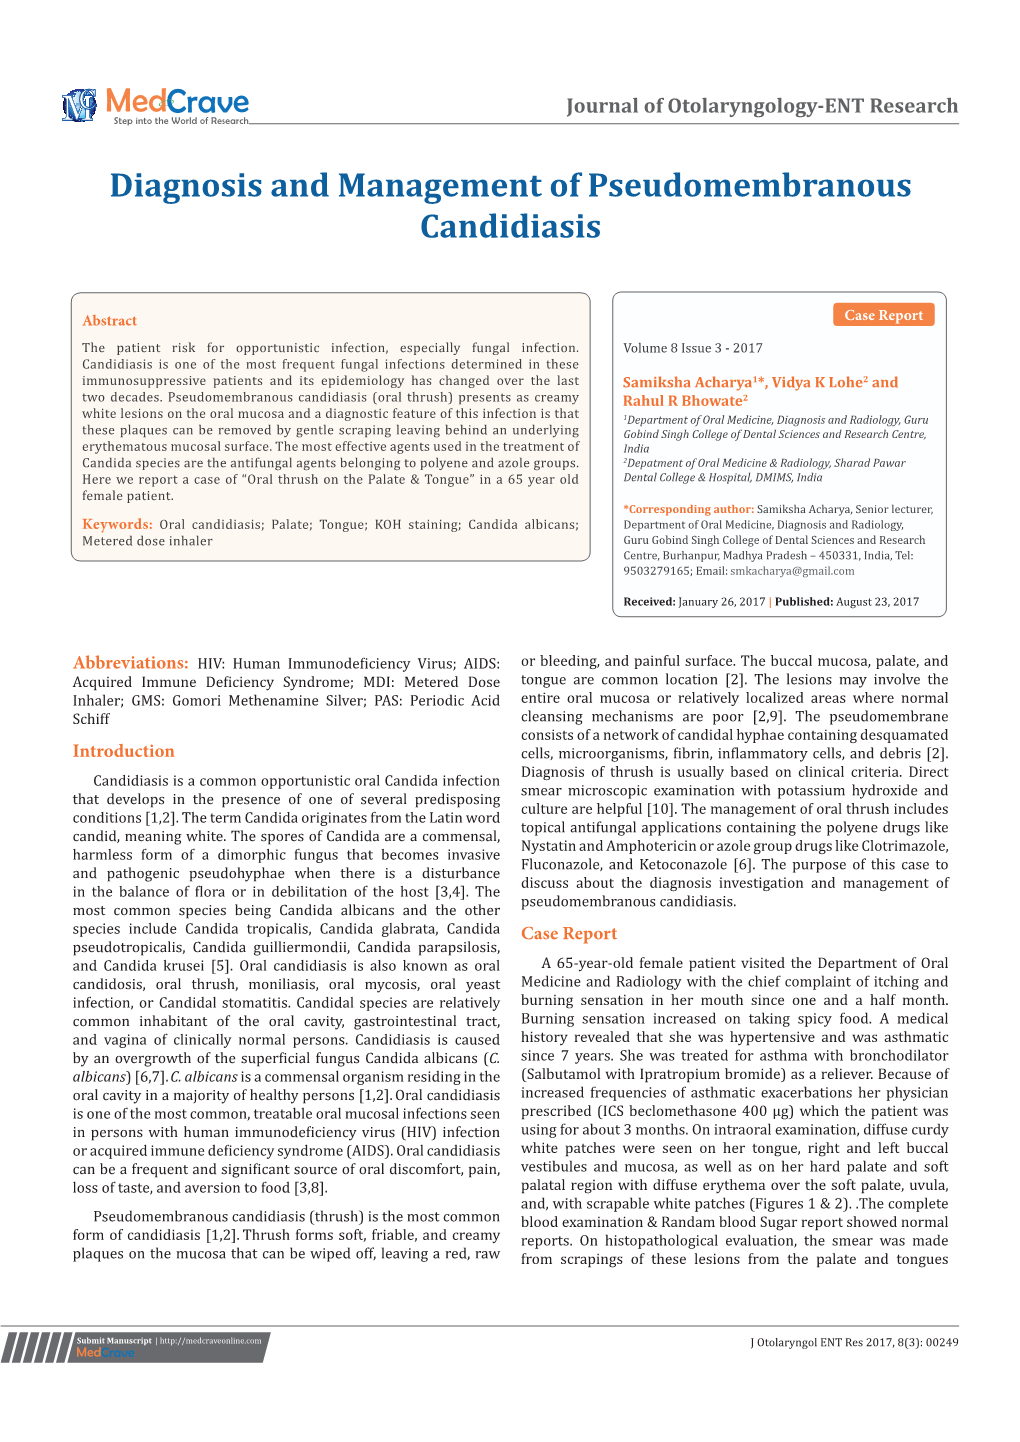 Diagnosis and Management of Pseudomembranous Candidiasis